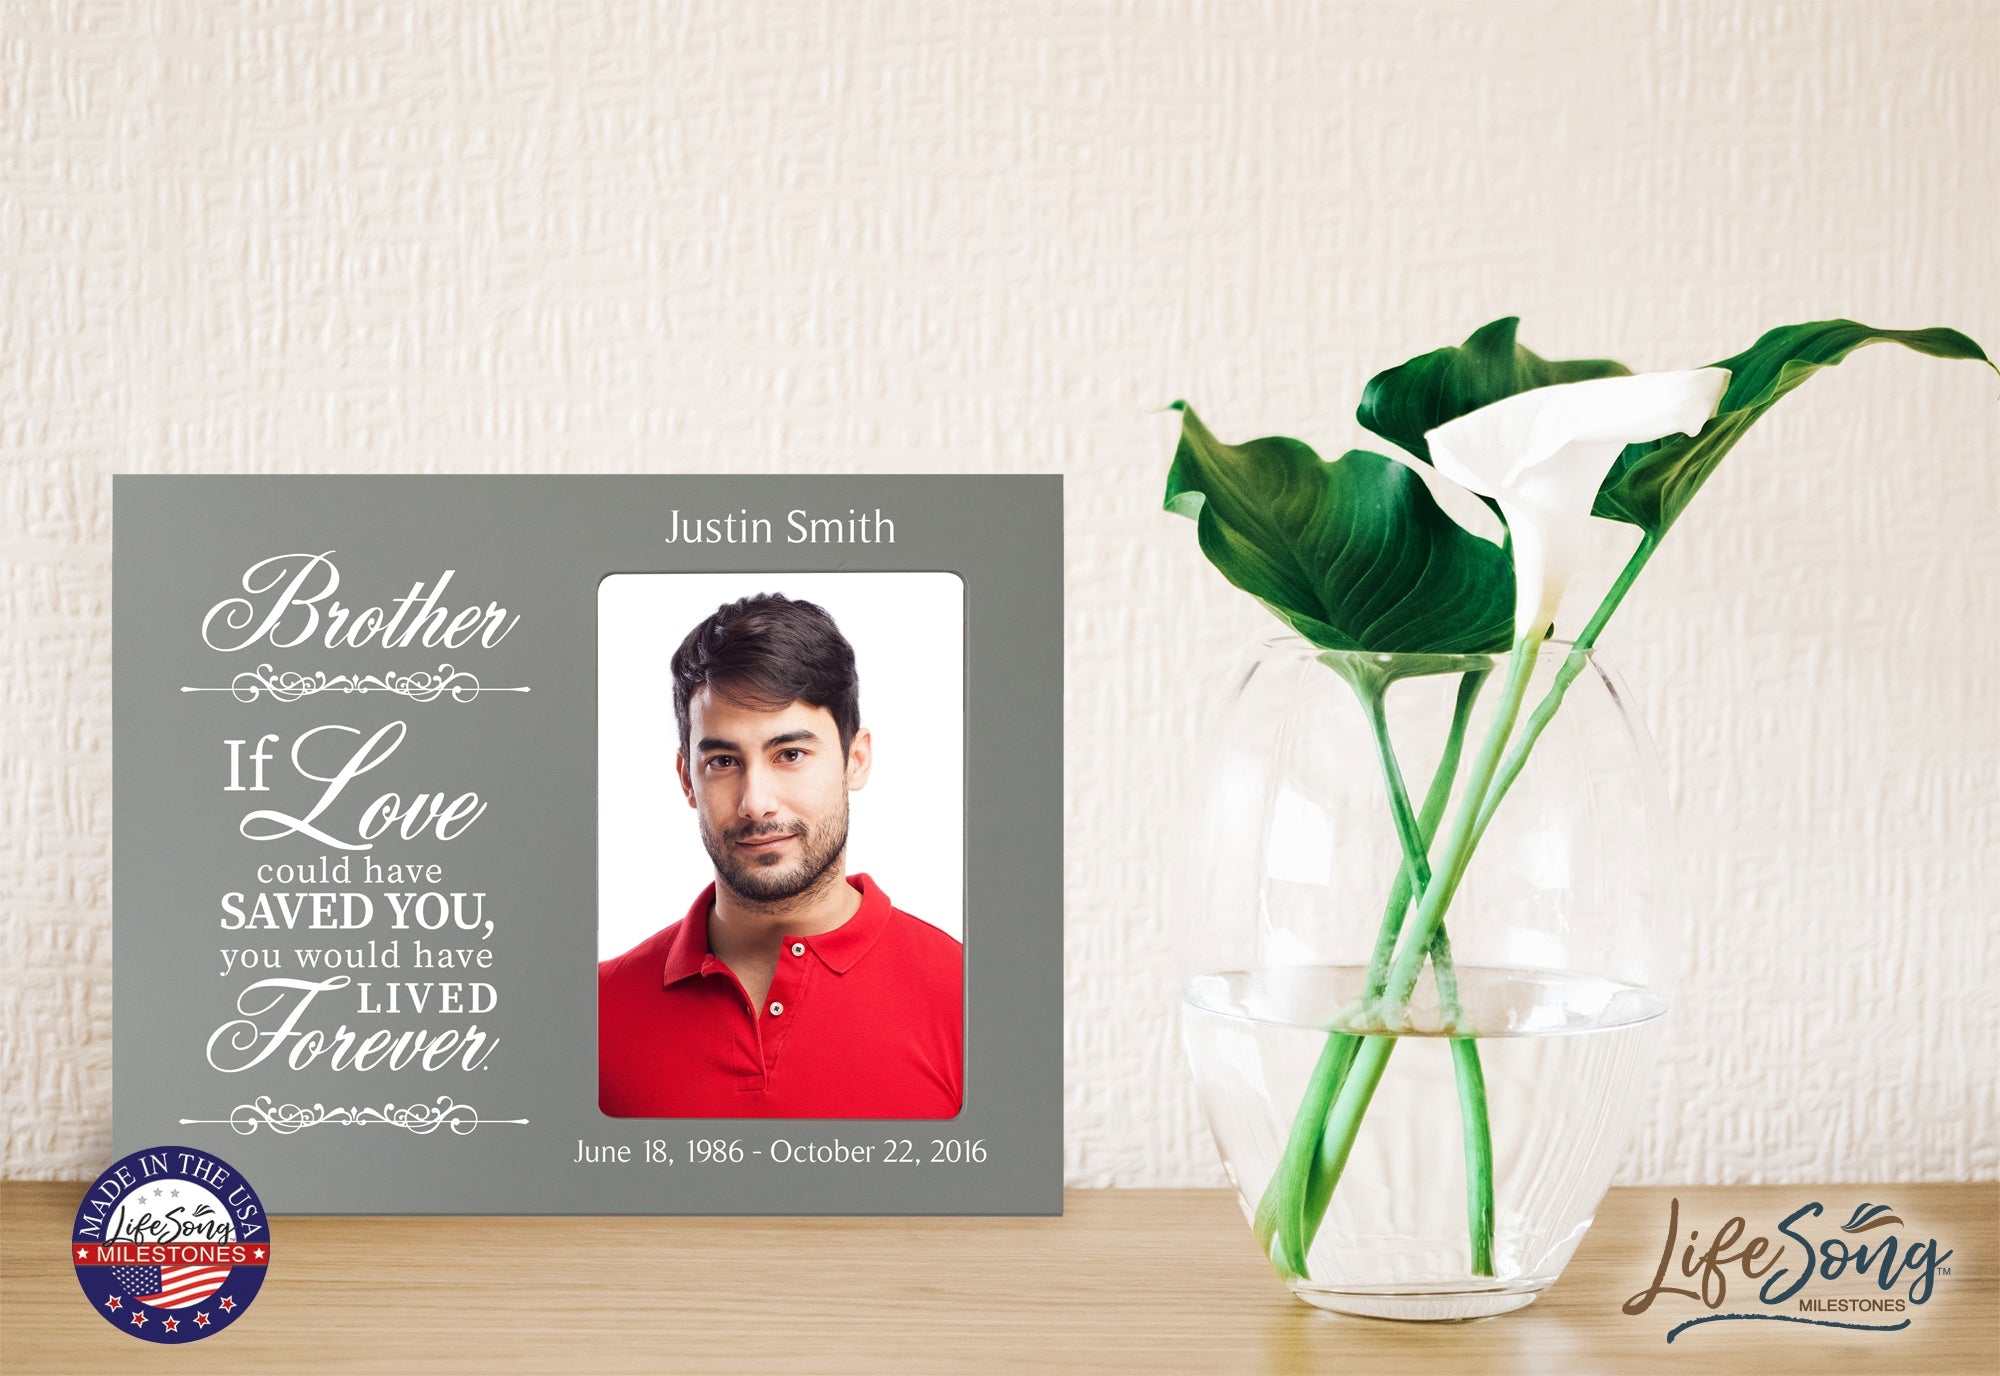 Personalized Wooden Memorial 8x10 Picture Frame holds 4x6 photo Brother, If Love Could - LifeSong Milestones